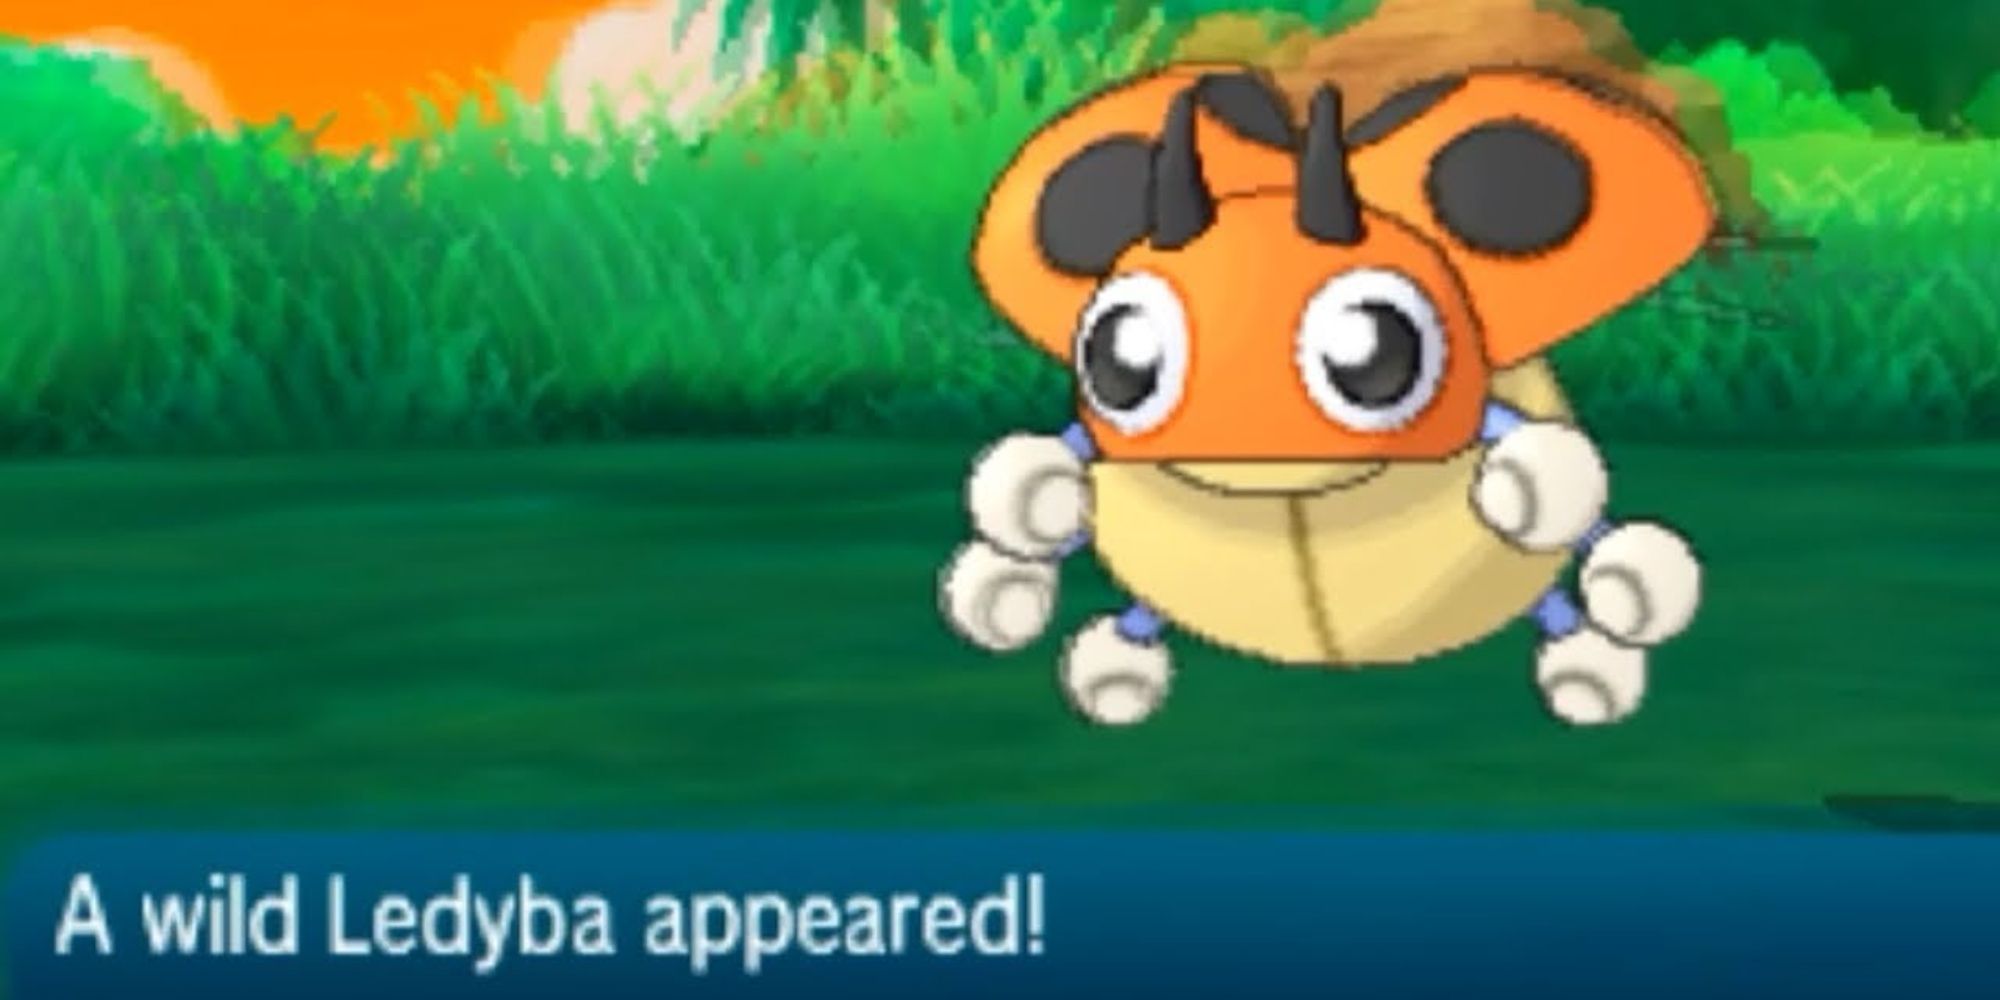 Ledyba appearing on stage while flying.